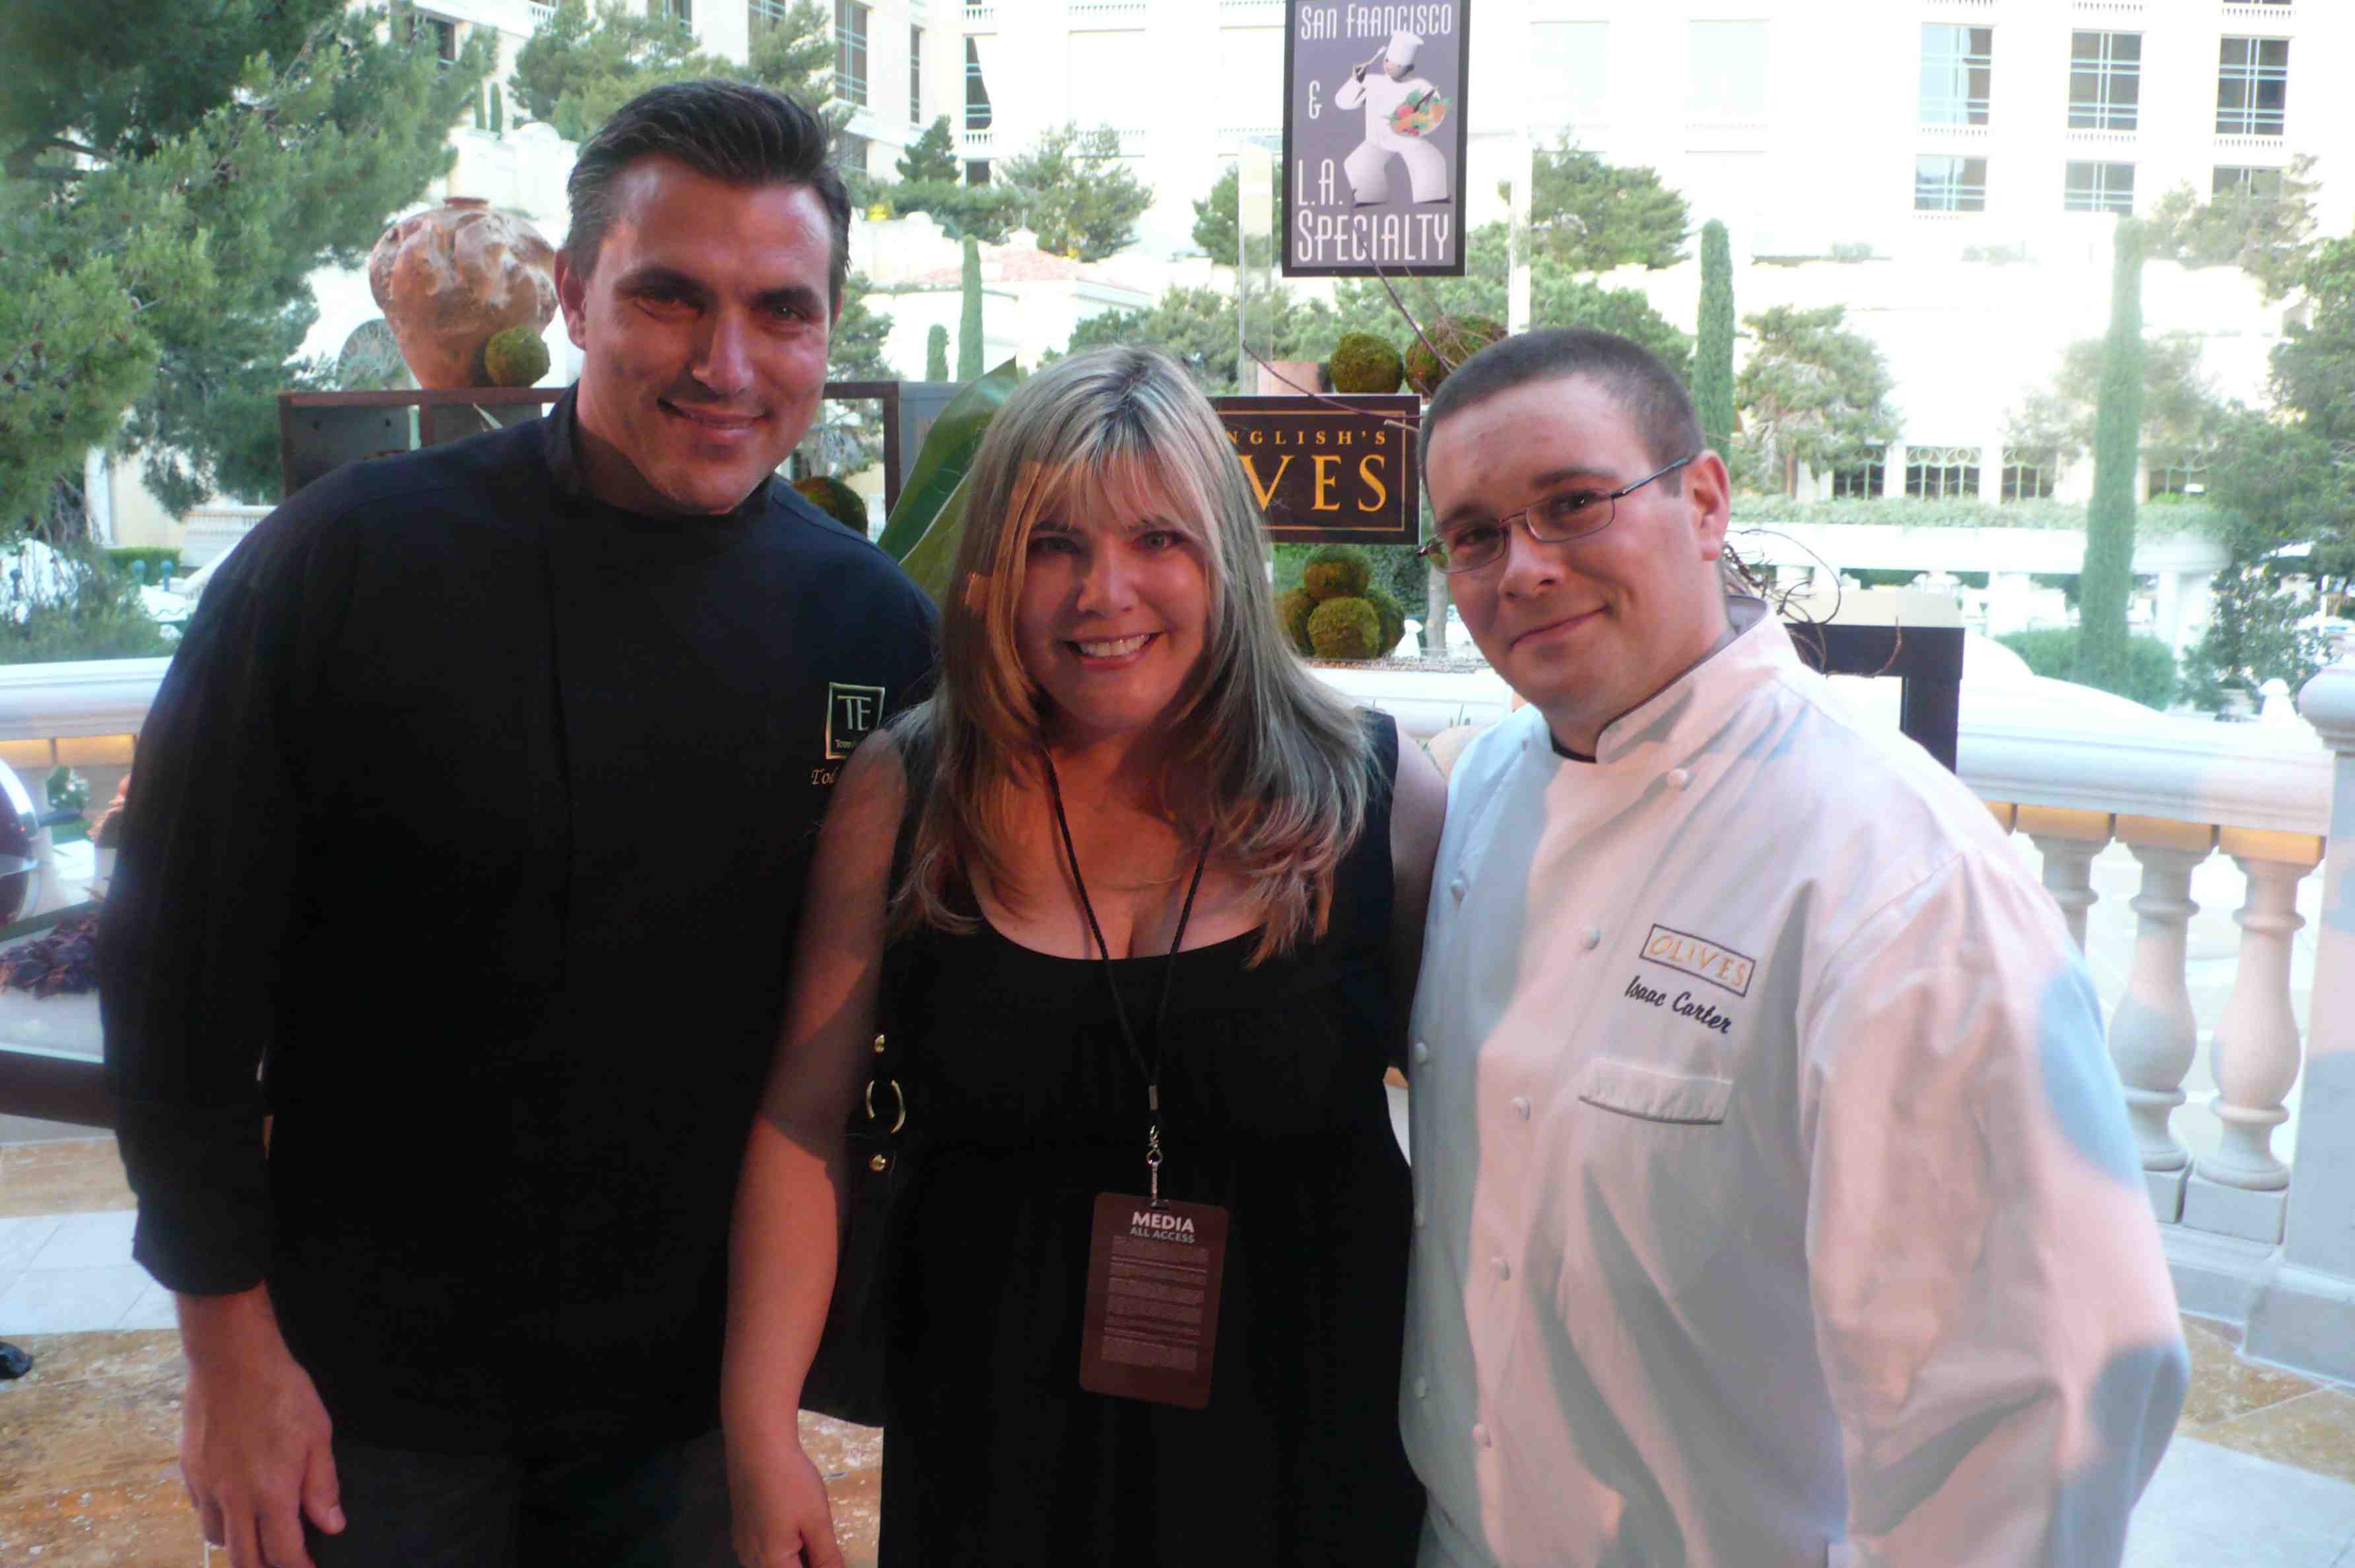 Me, with the two master chefs Todd English and Isaac Carter